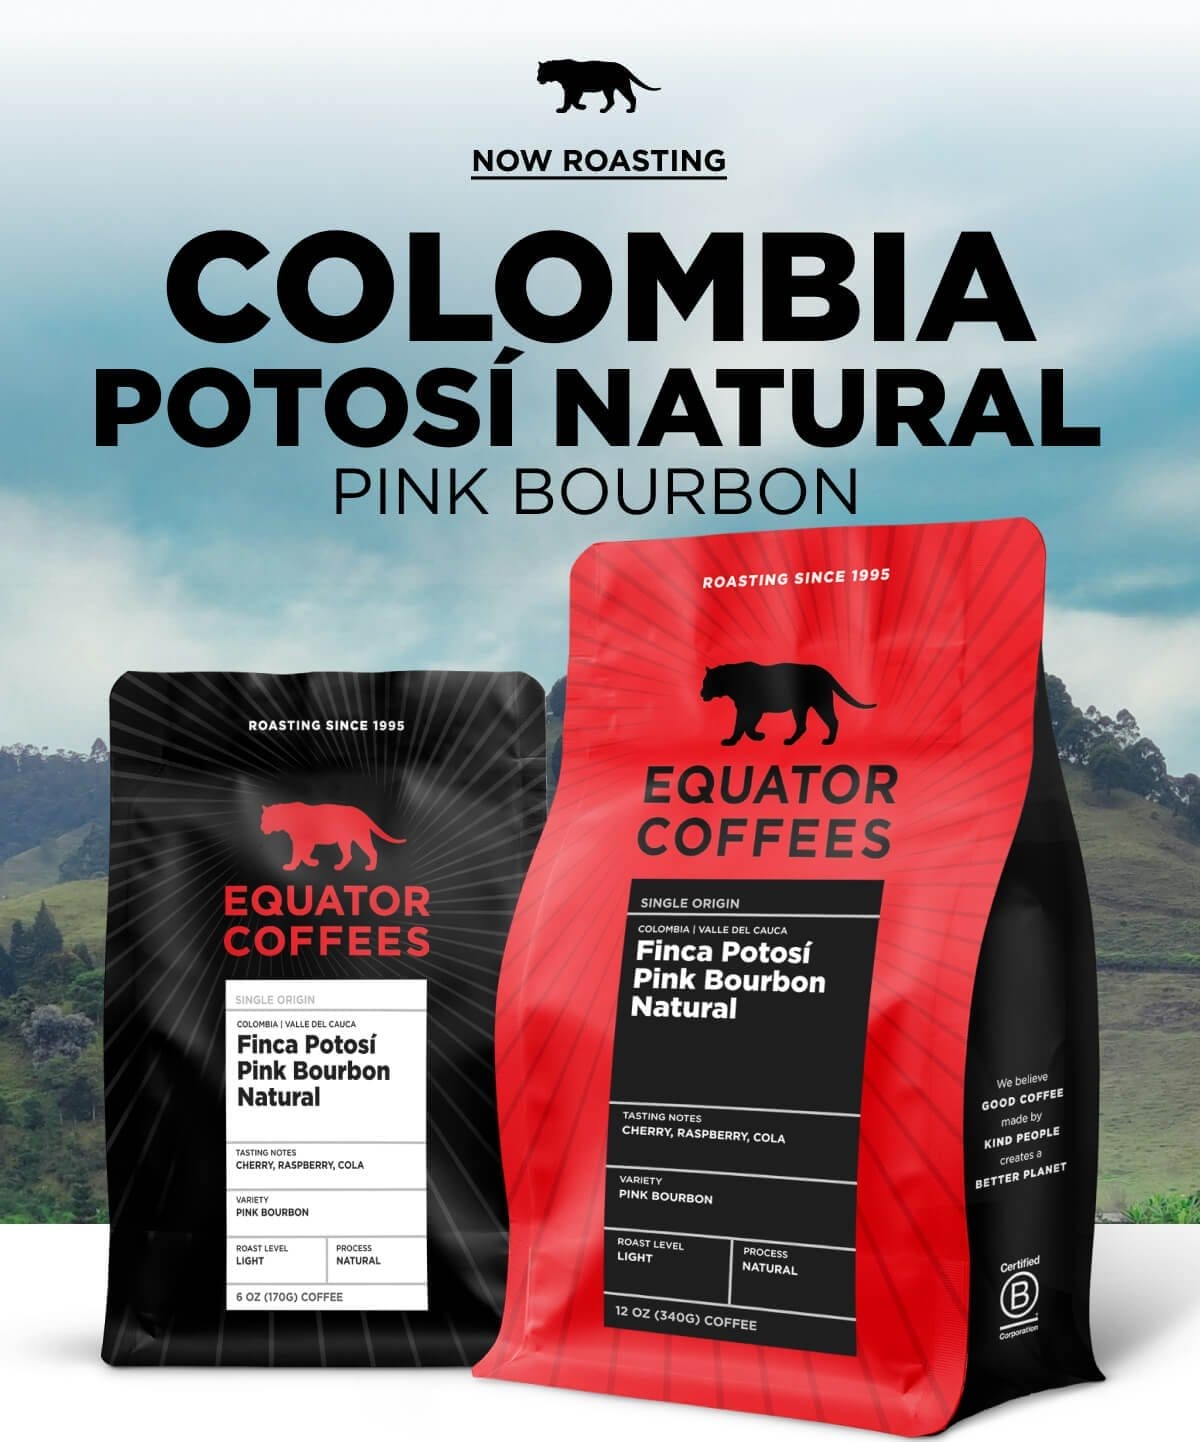 Now Roasting: Colombia Potosí Pink Bourbon Natural